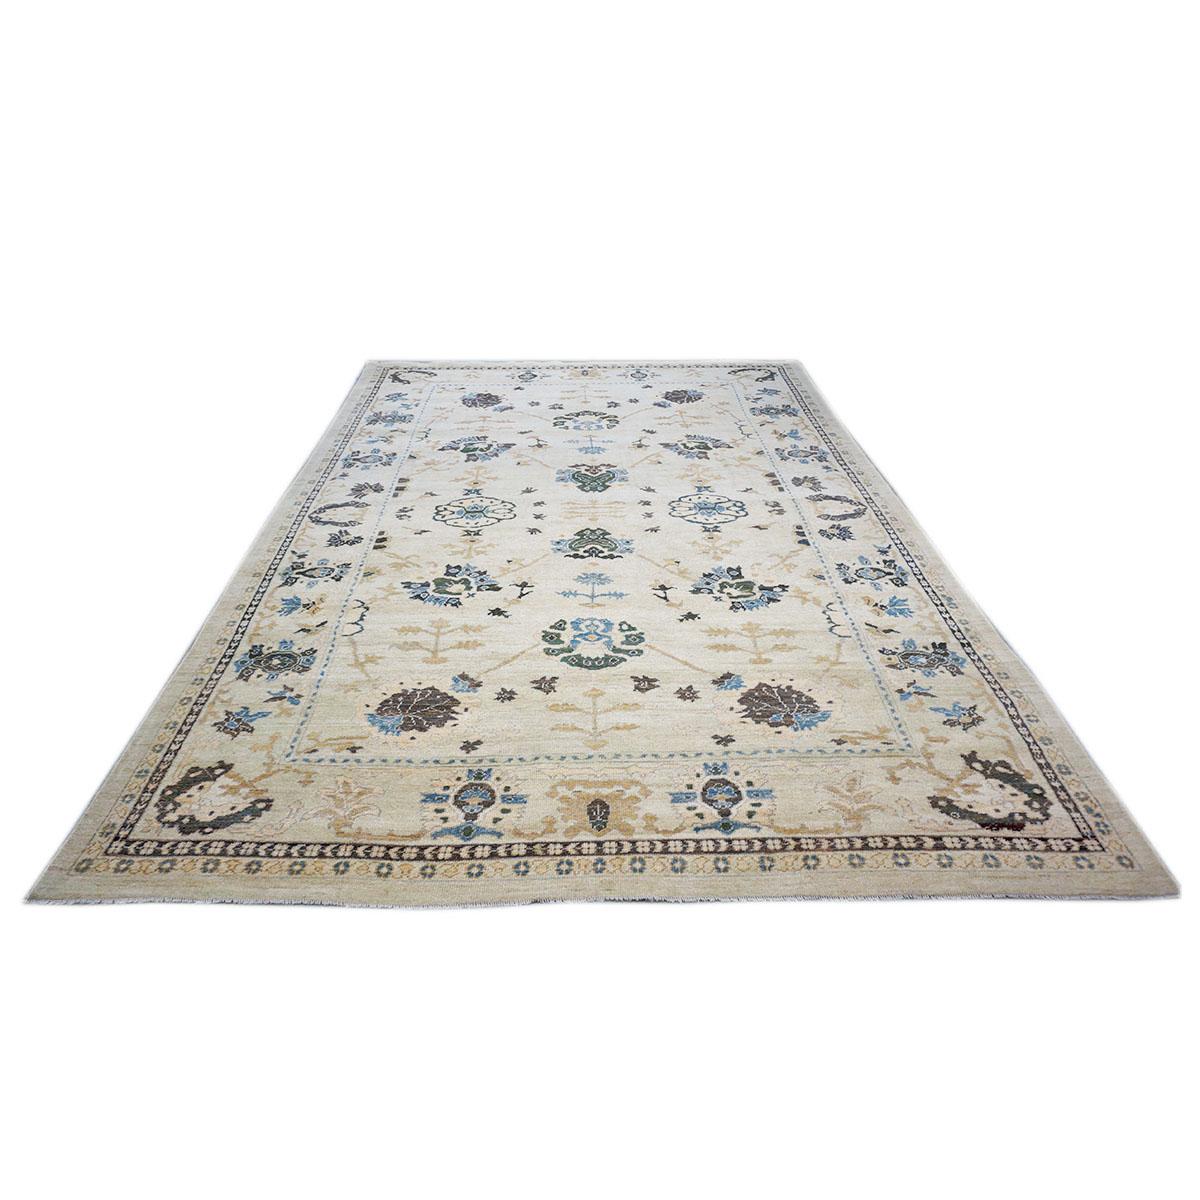 21st Century Turkish Oushak 9x12 Ivory & Blue Handmade Room Sized Area Rug In Excellent Condition For Sale In Houston, TX